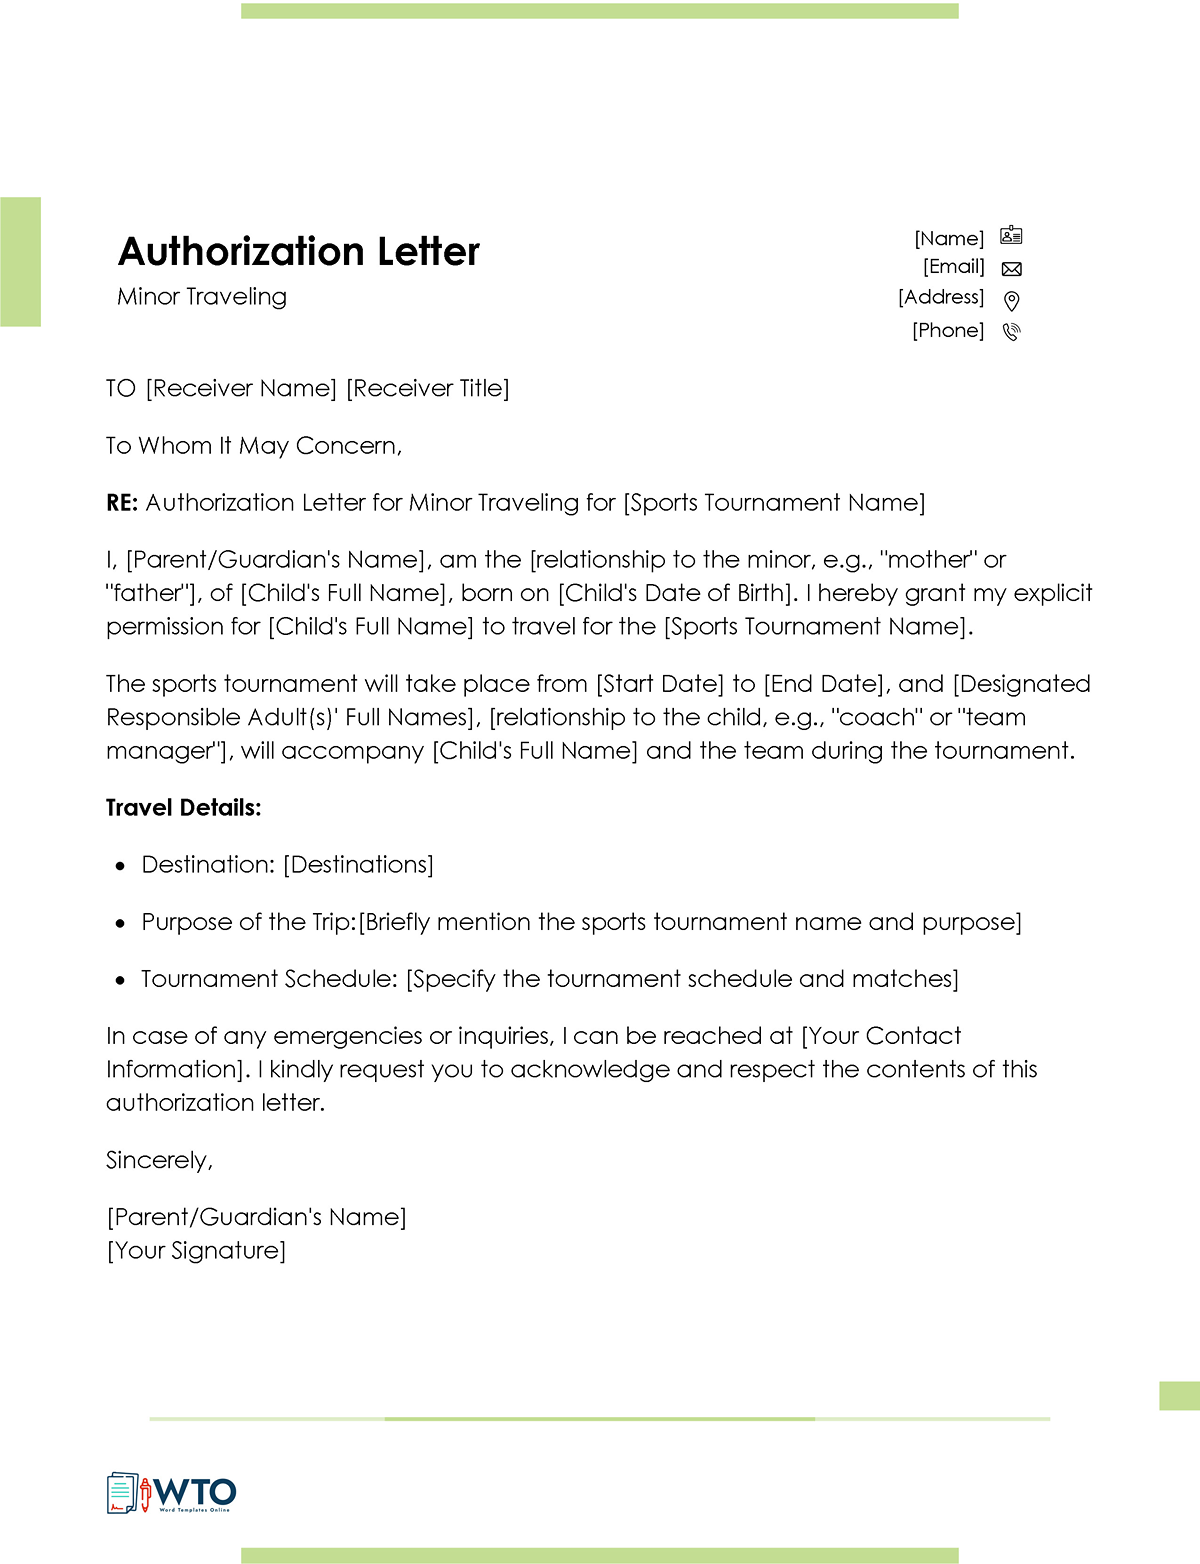 Authorization Letter toTravel with Minor Template-Ms Word Free Download